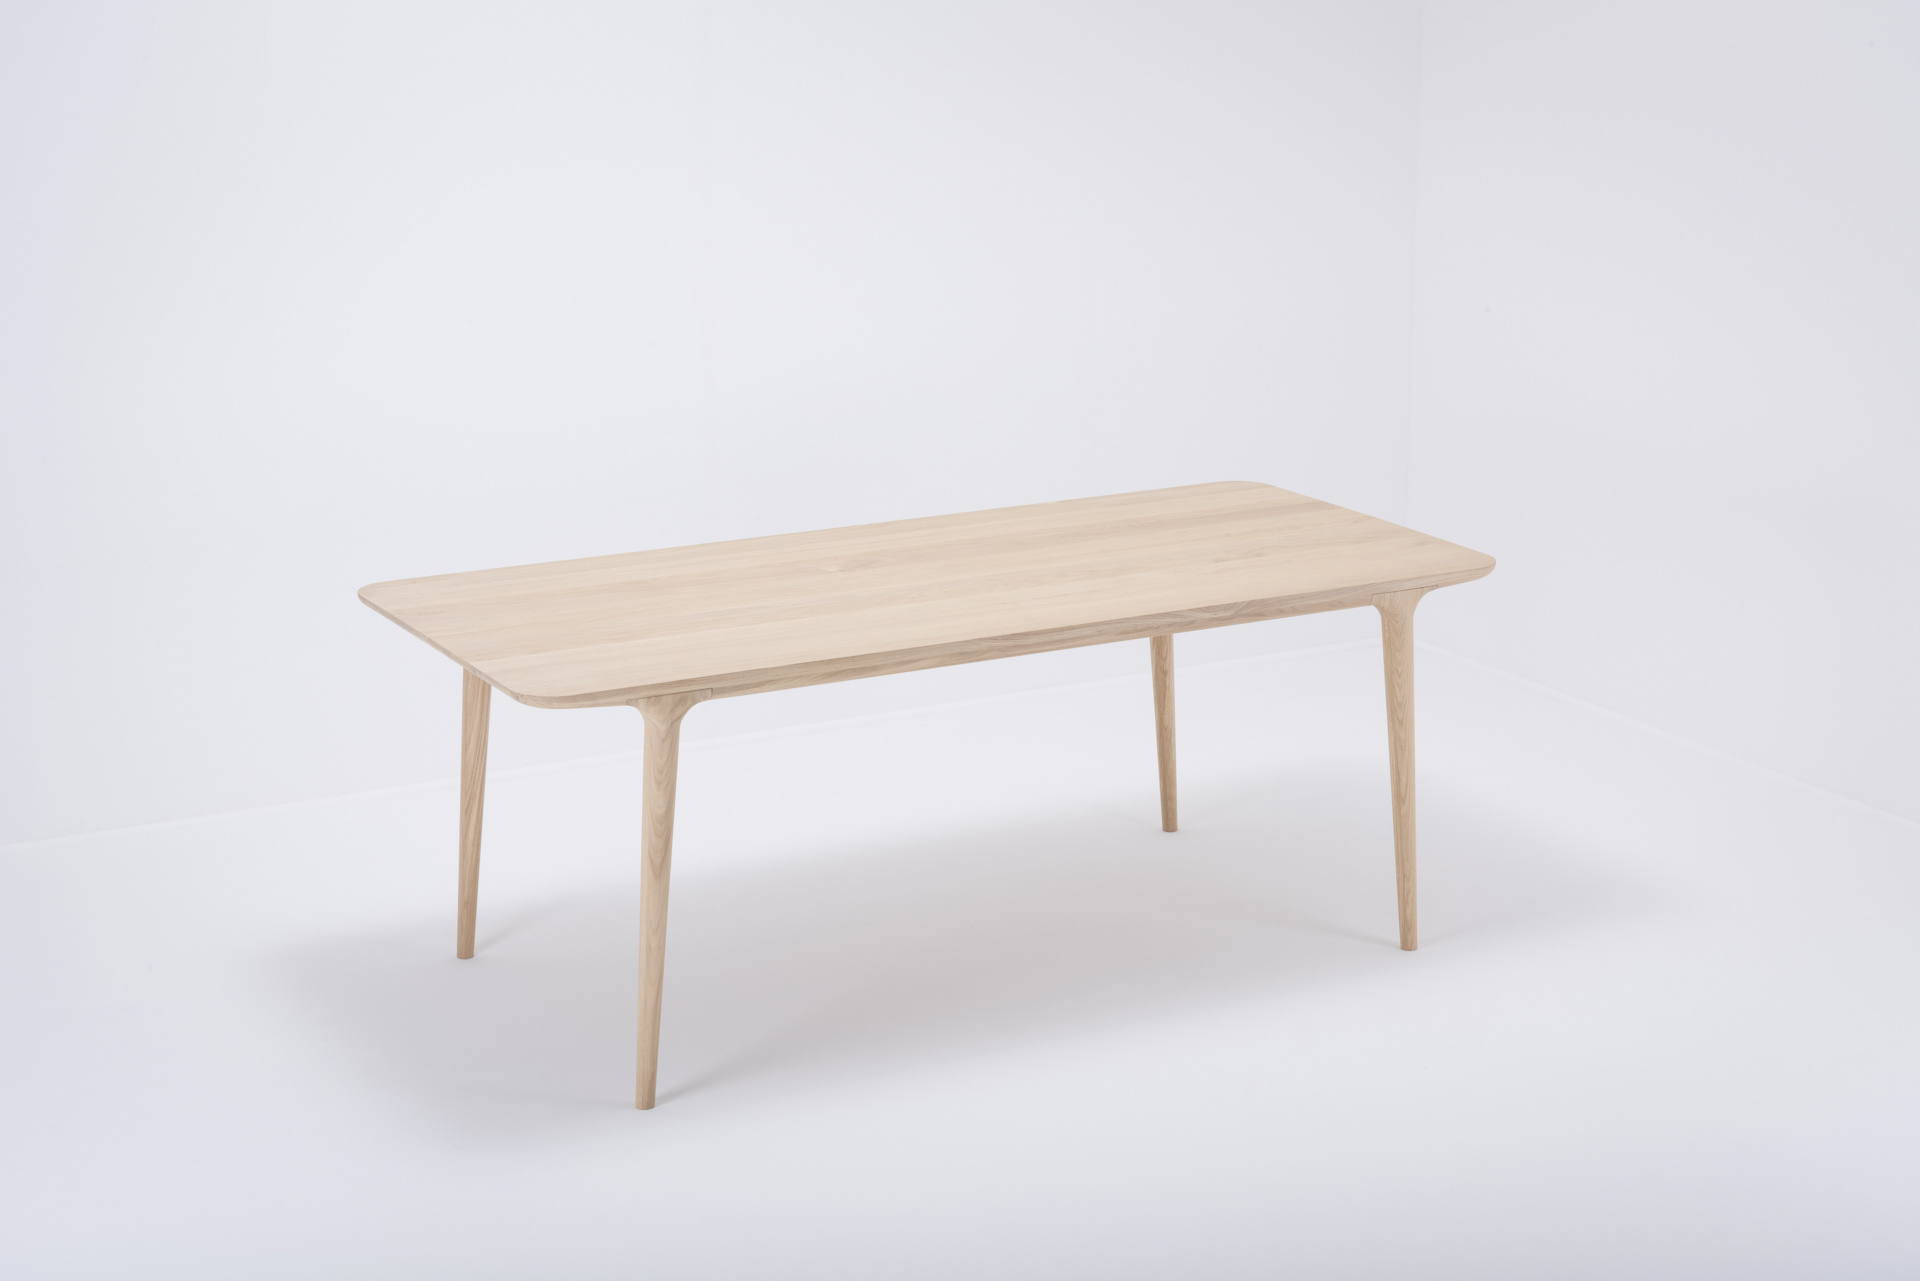 Gazzda Fawn Table - 220 x 90 - Solid Oiled Oak (natural)